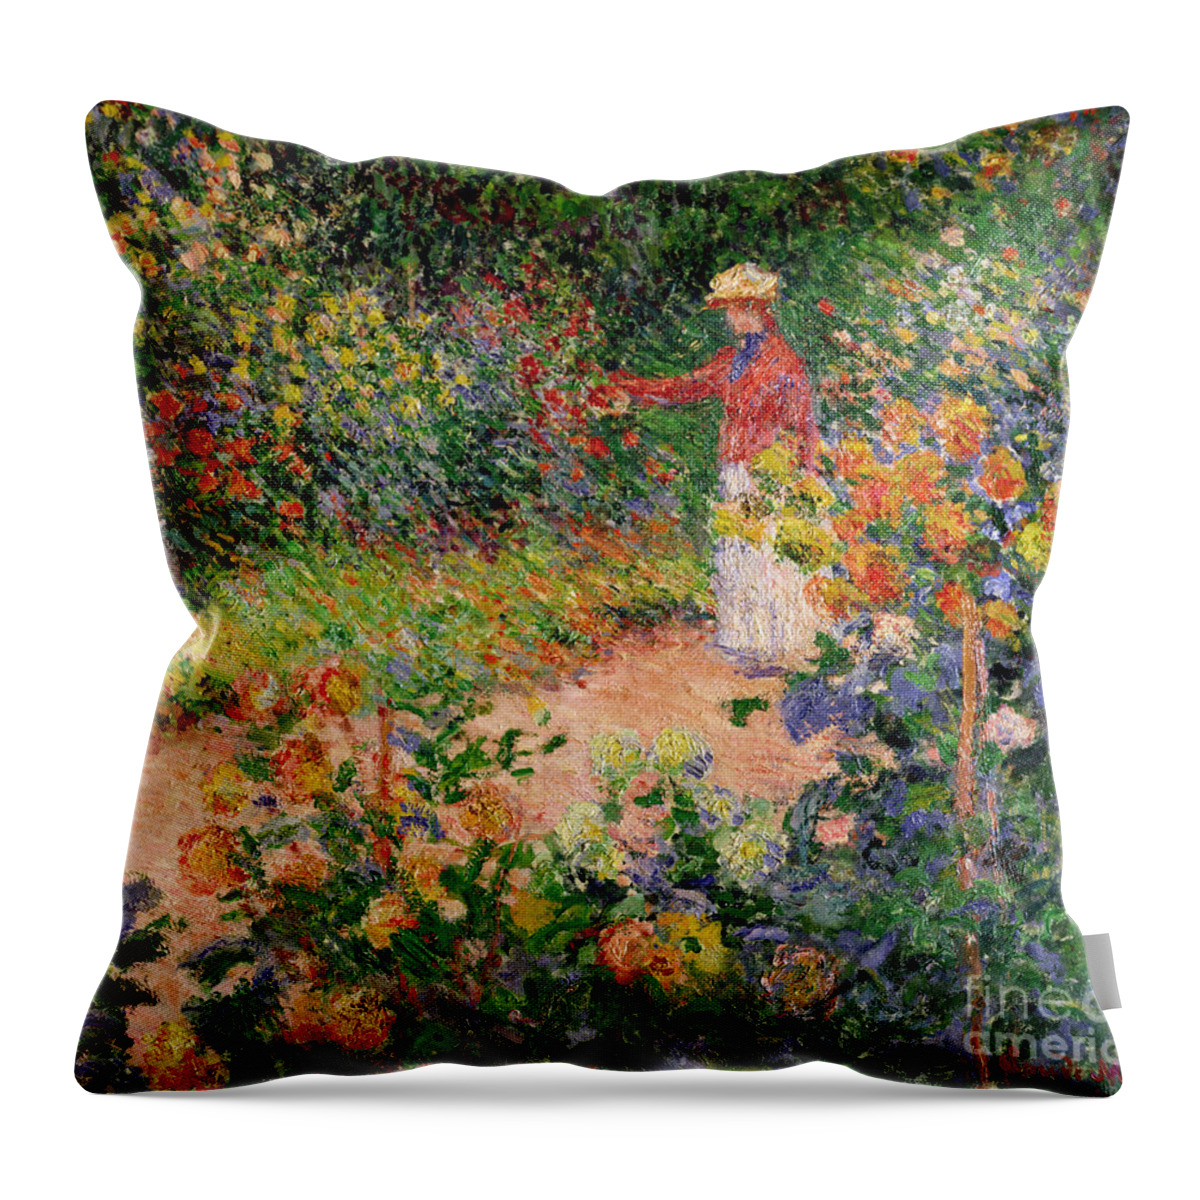 Garden At Giverny Throw Pillow featuring the painting Garden at Giverny by Claude Monet